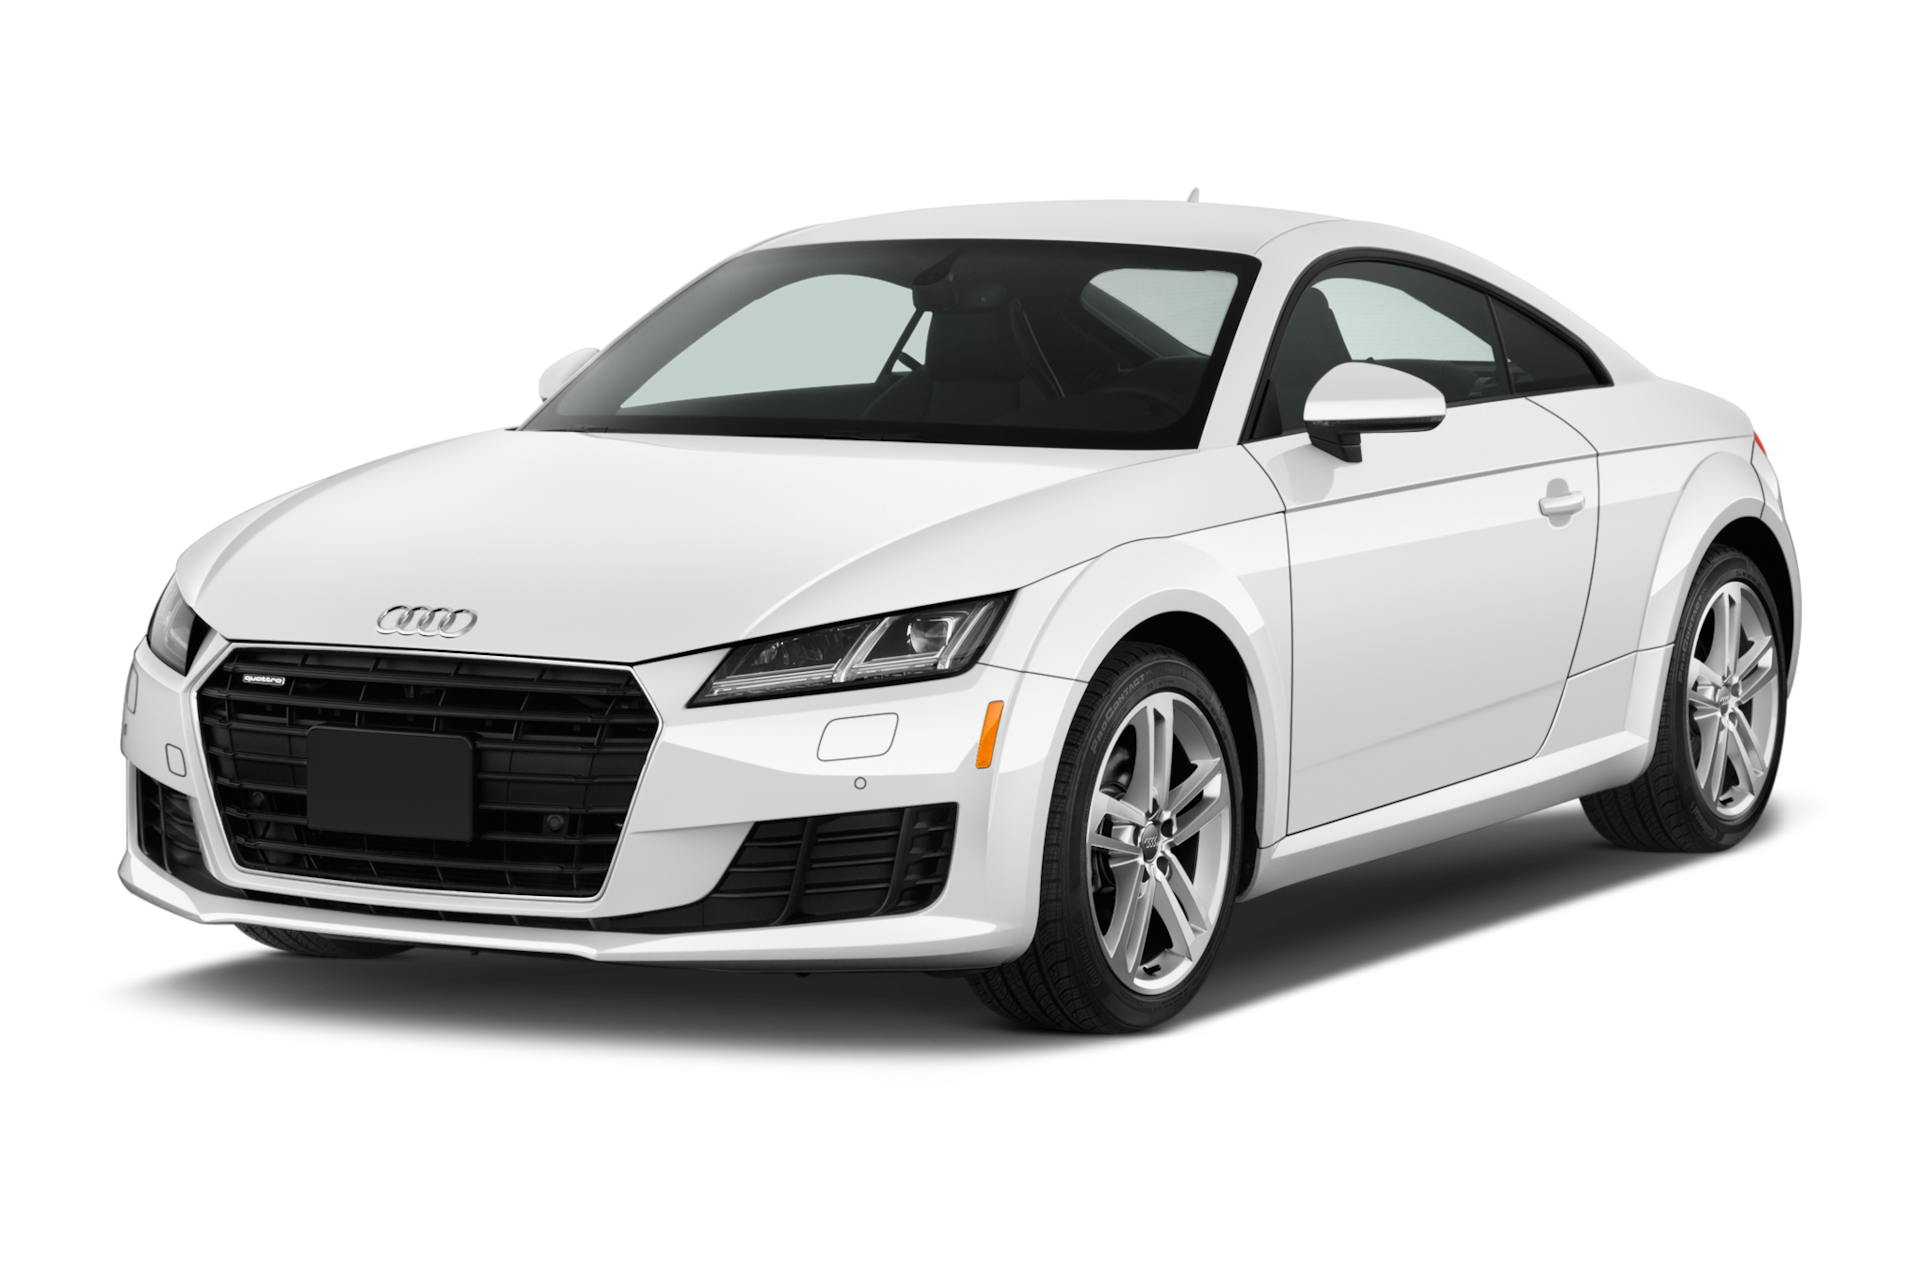 2016 Audi TT Prices, Reviews, and Photos - MotorTrend